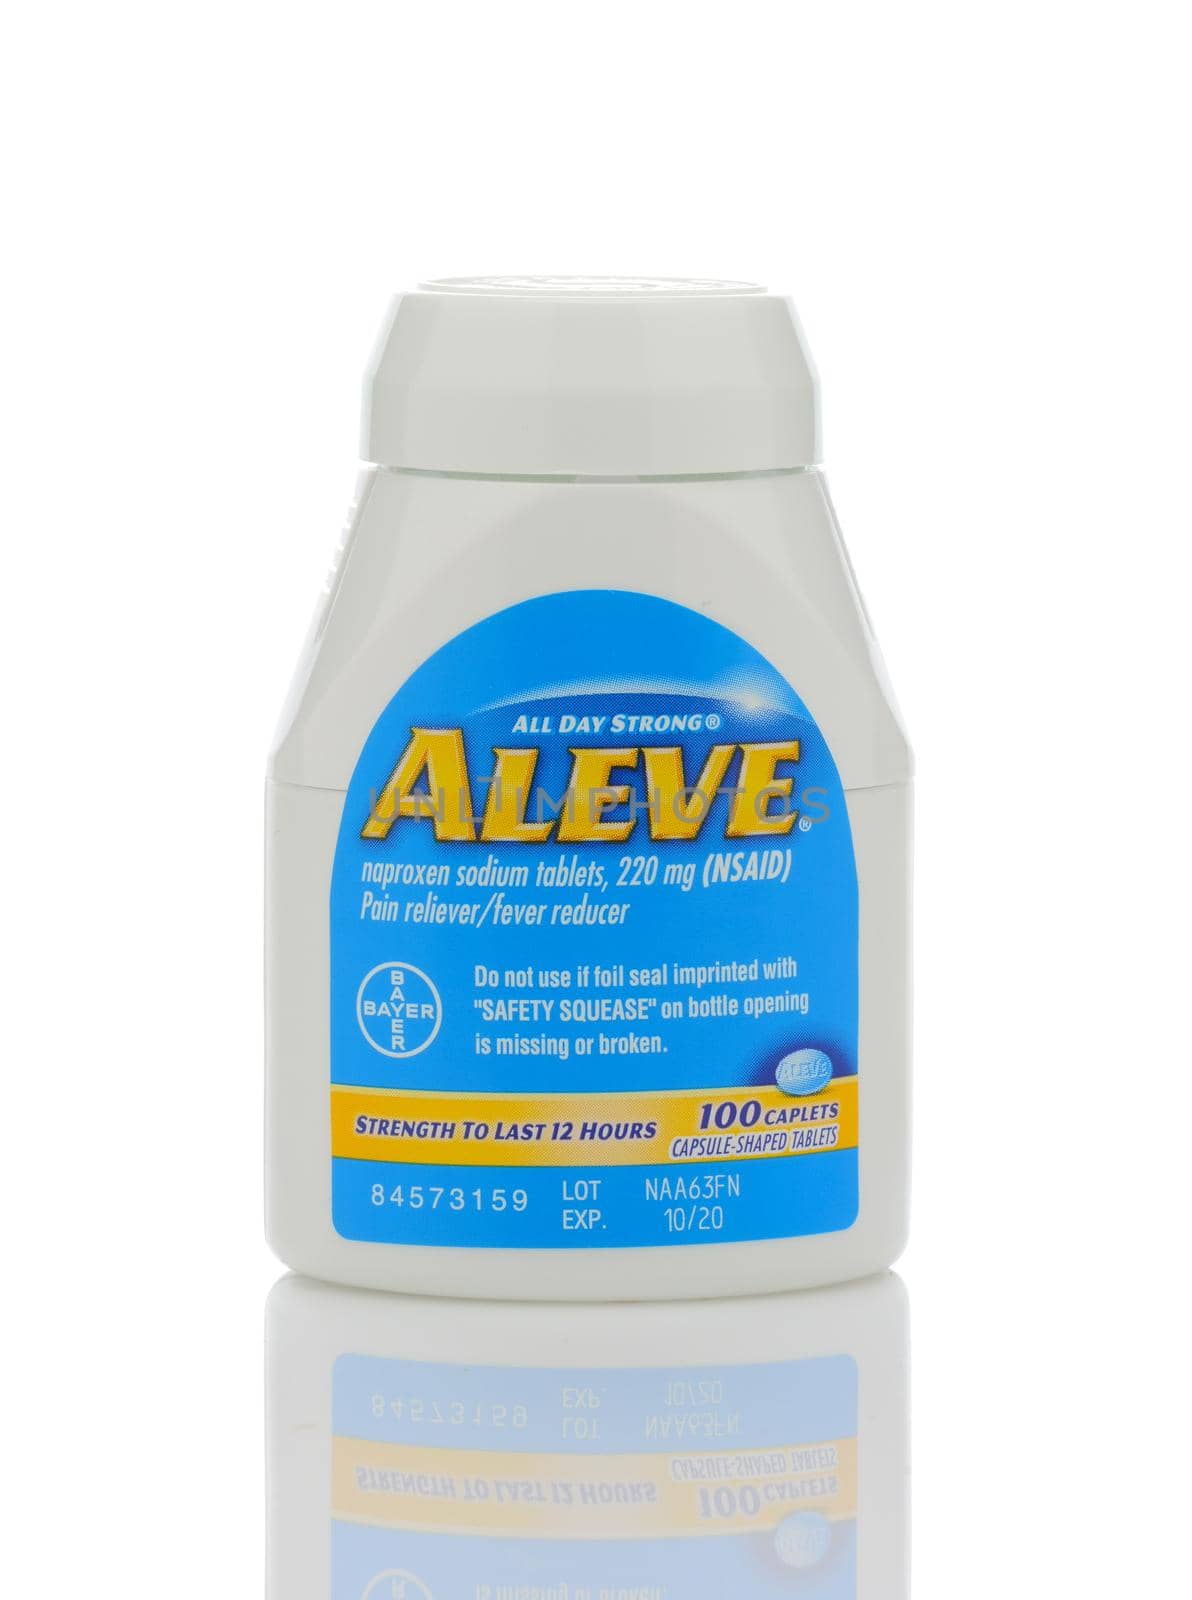 A bottle of Aleve Caplets, a Naproxen Sodium pain reliever from Bayer by sCukrov